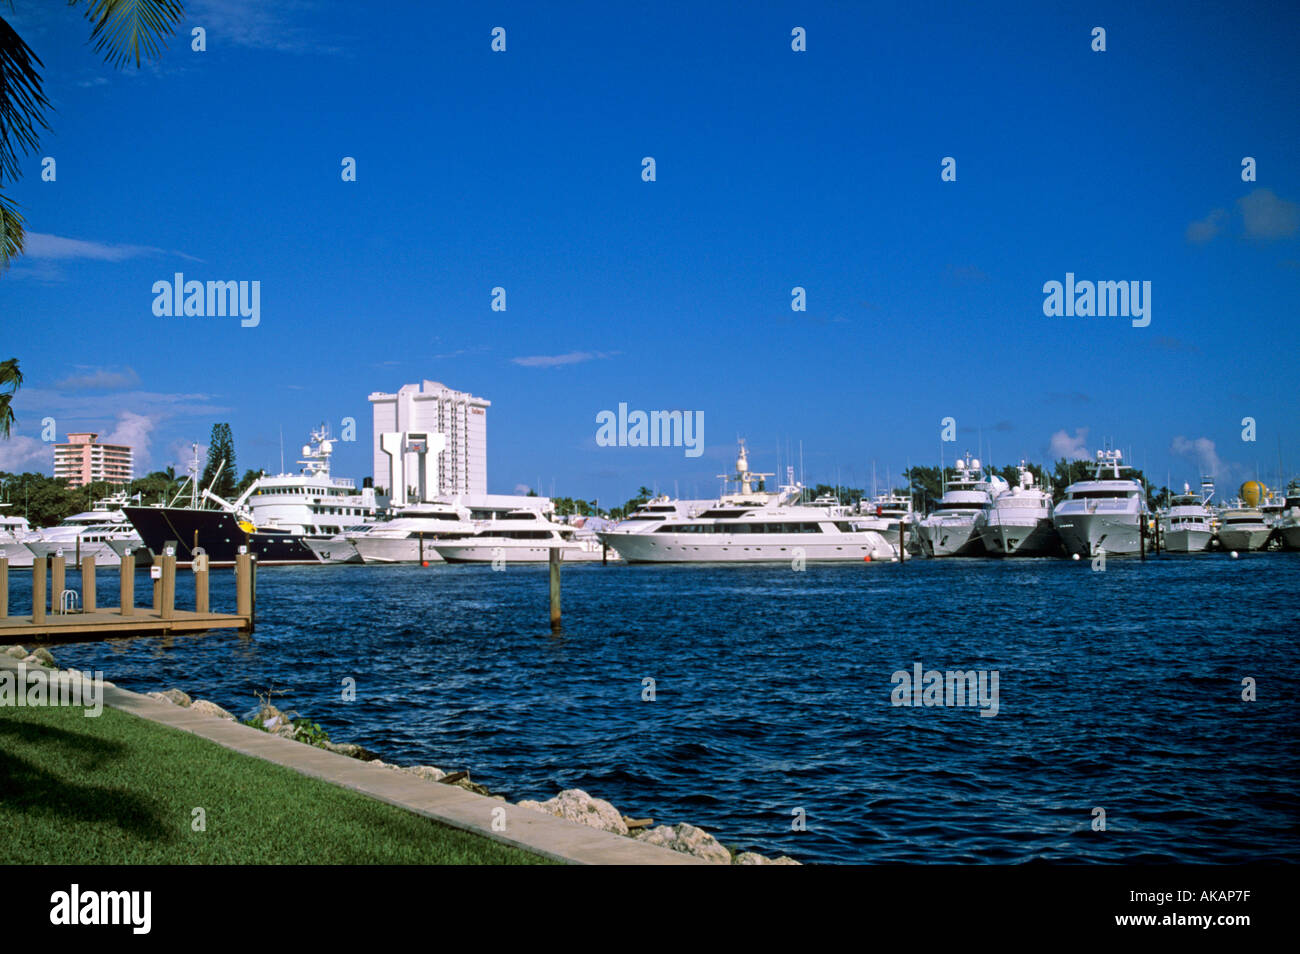 Yachts moored in inter coastal waterway Fort Lauderdale Florida USA Stock Photo